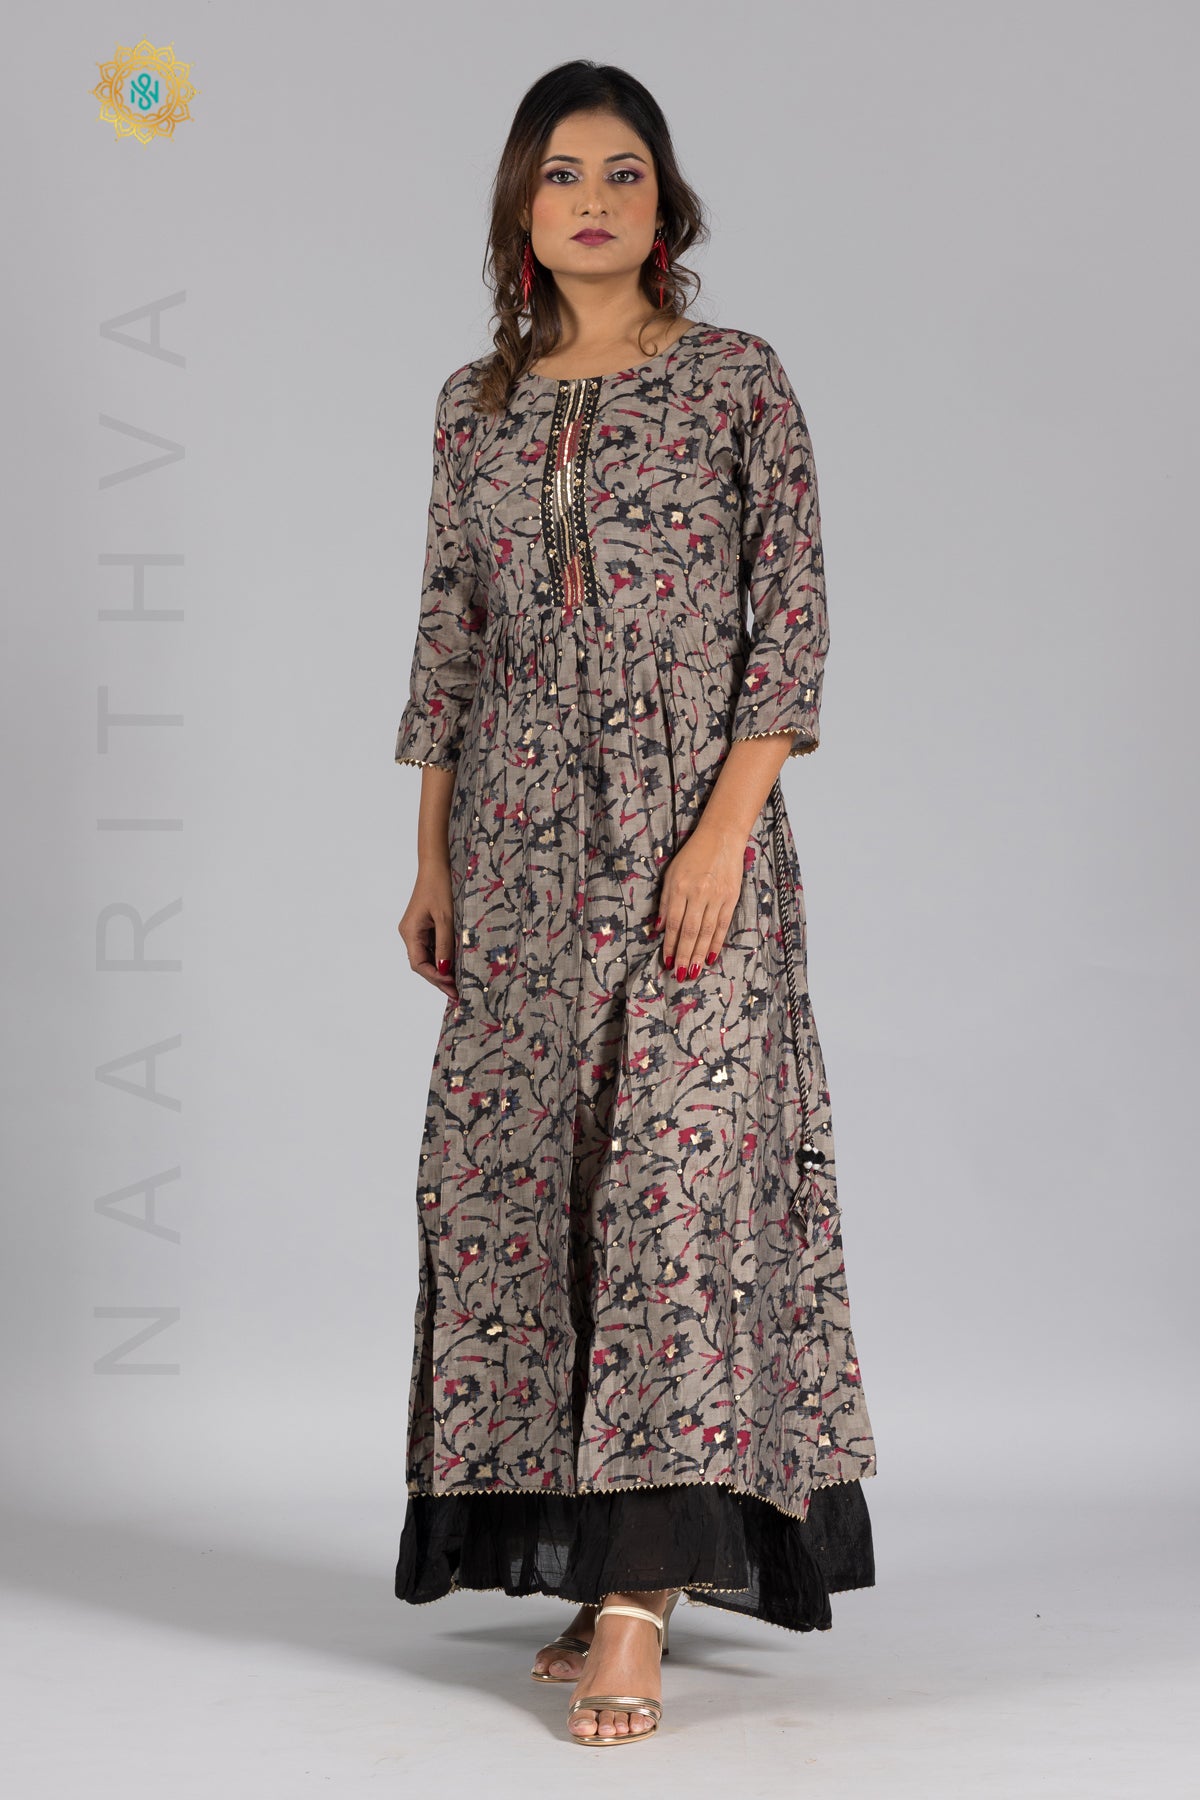 GREY WITH BLACK - PRINTED FLOOR LENGHT KURTHI WITH BEAUTIFUL HANDWORK ON NECKLINE